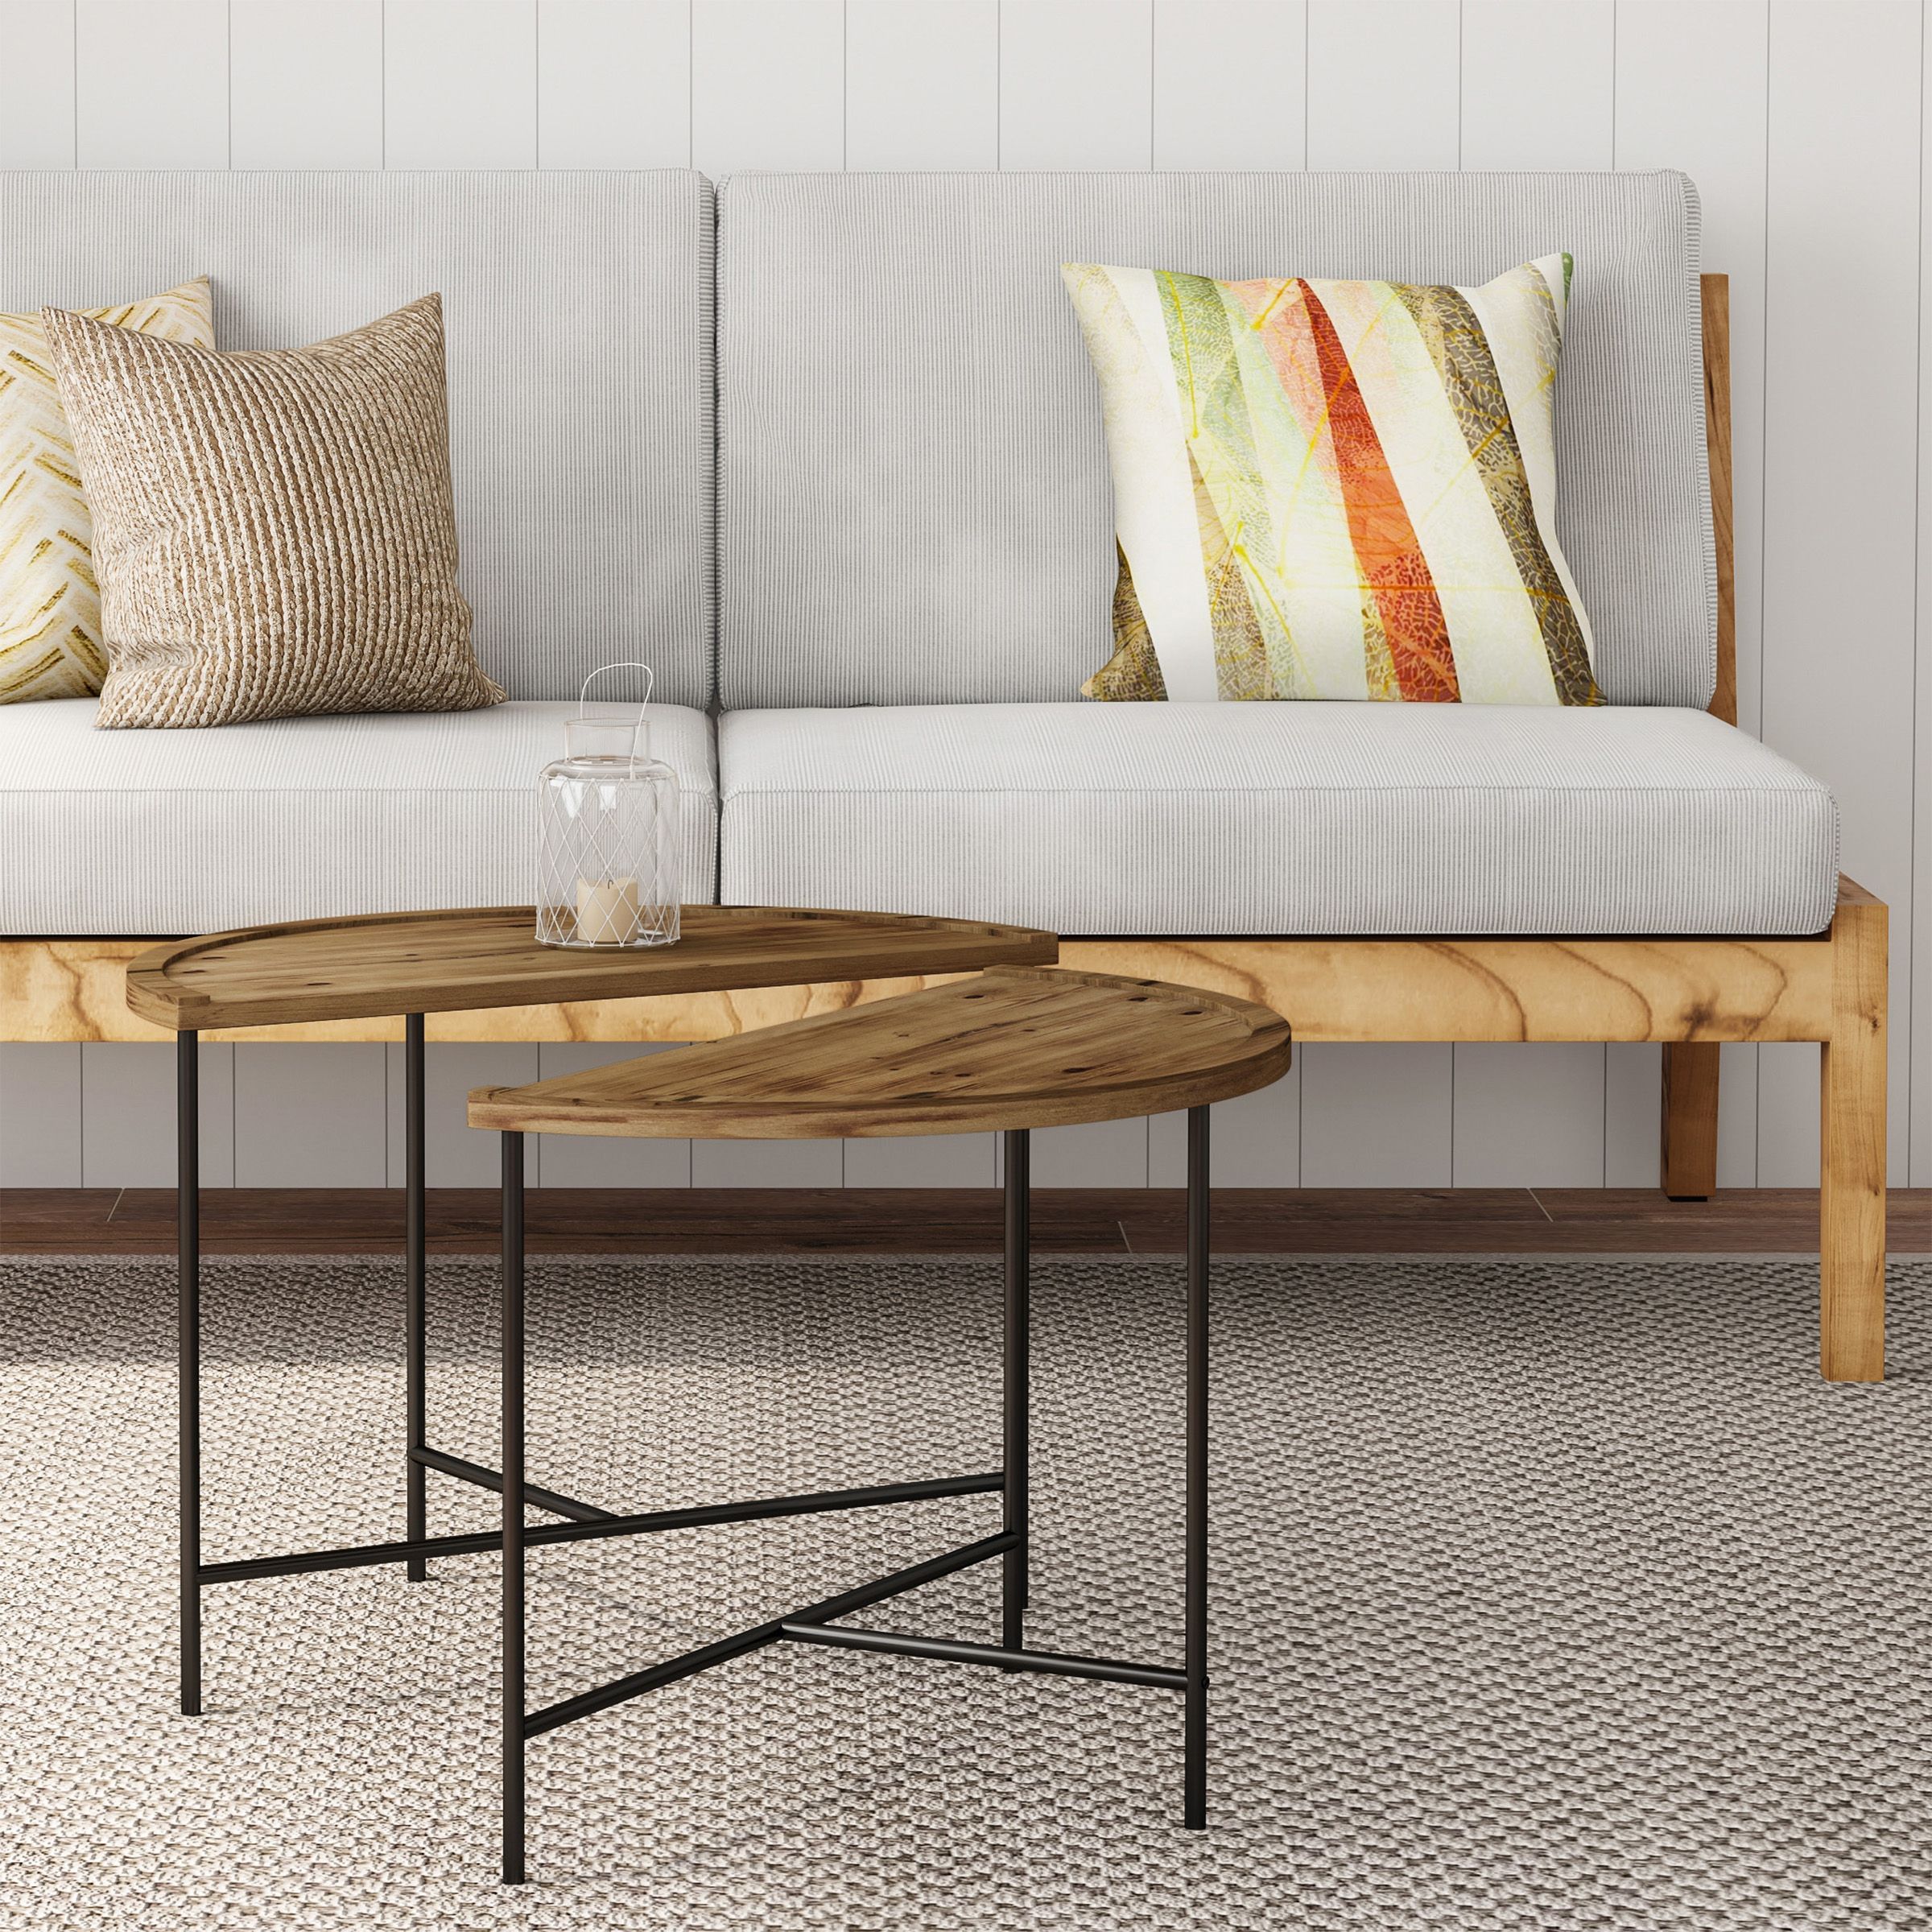 Half Moon Coffee Tables  Set Of 2, Use Together Or Separately As Side Intended For Most Up To Date Modern Farmhouse Coffee Tables (View 6 of 10)